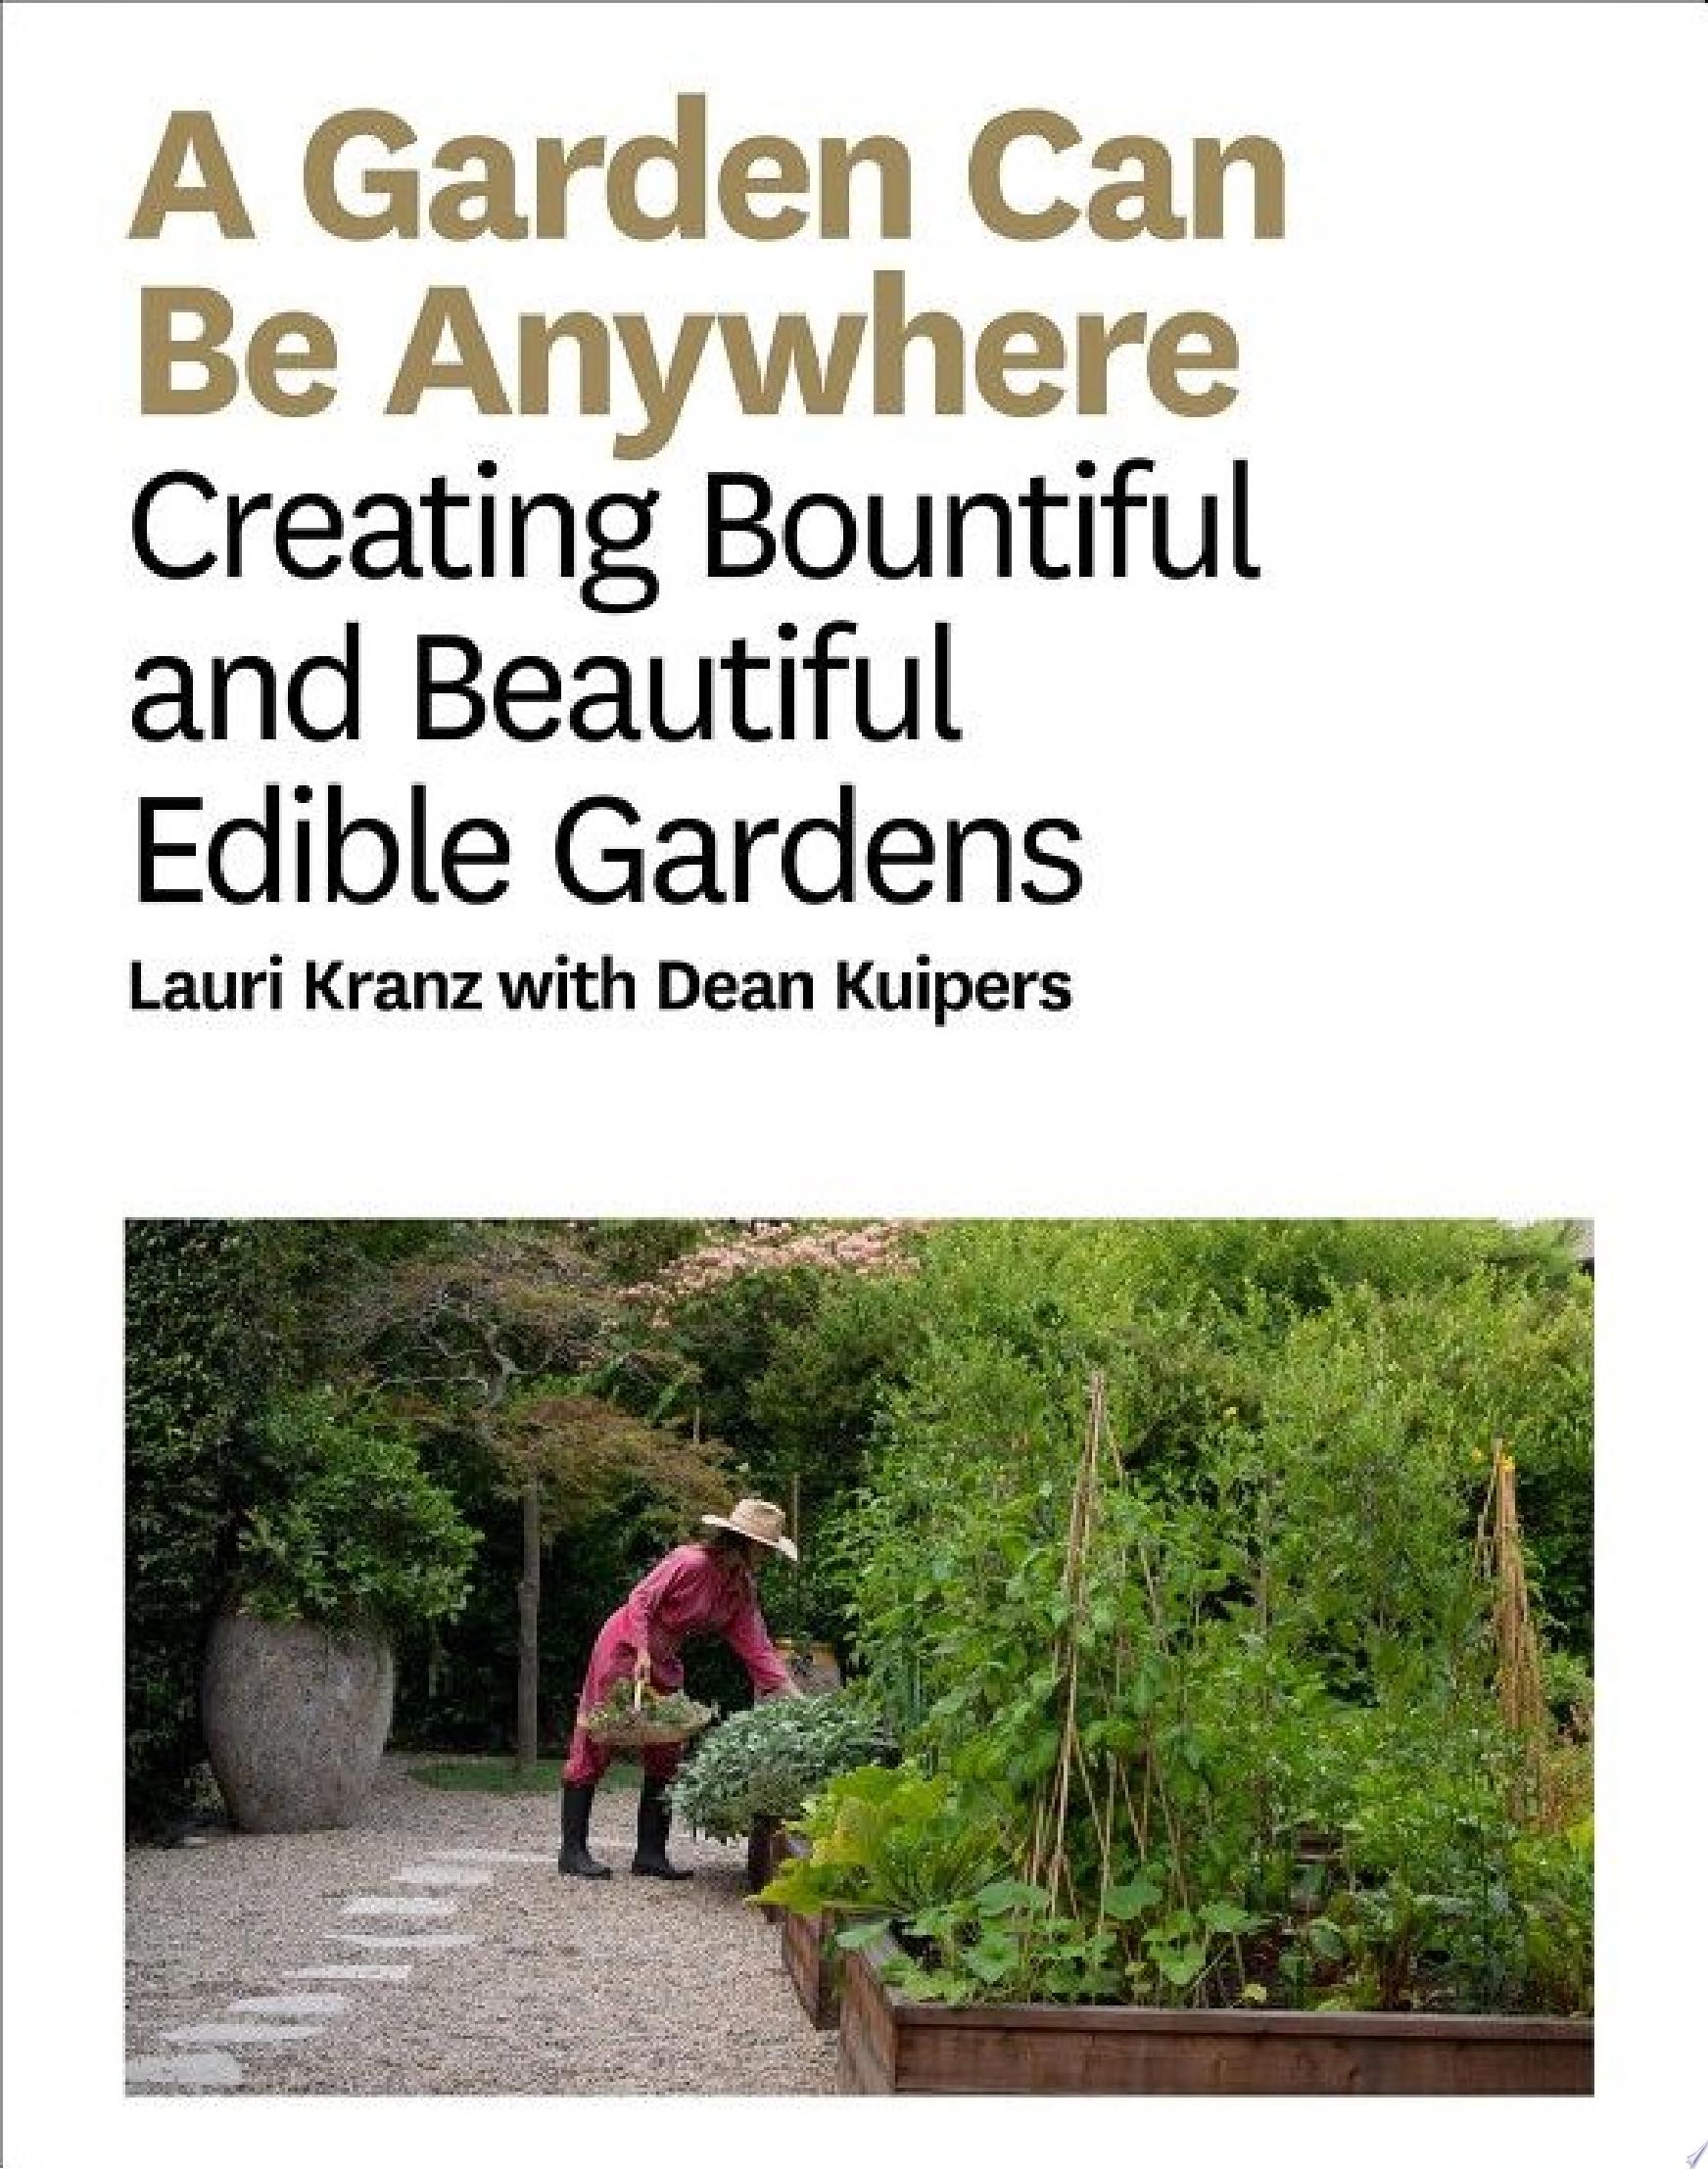 Image for "A Garden Can Be Anywhere"